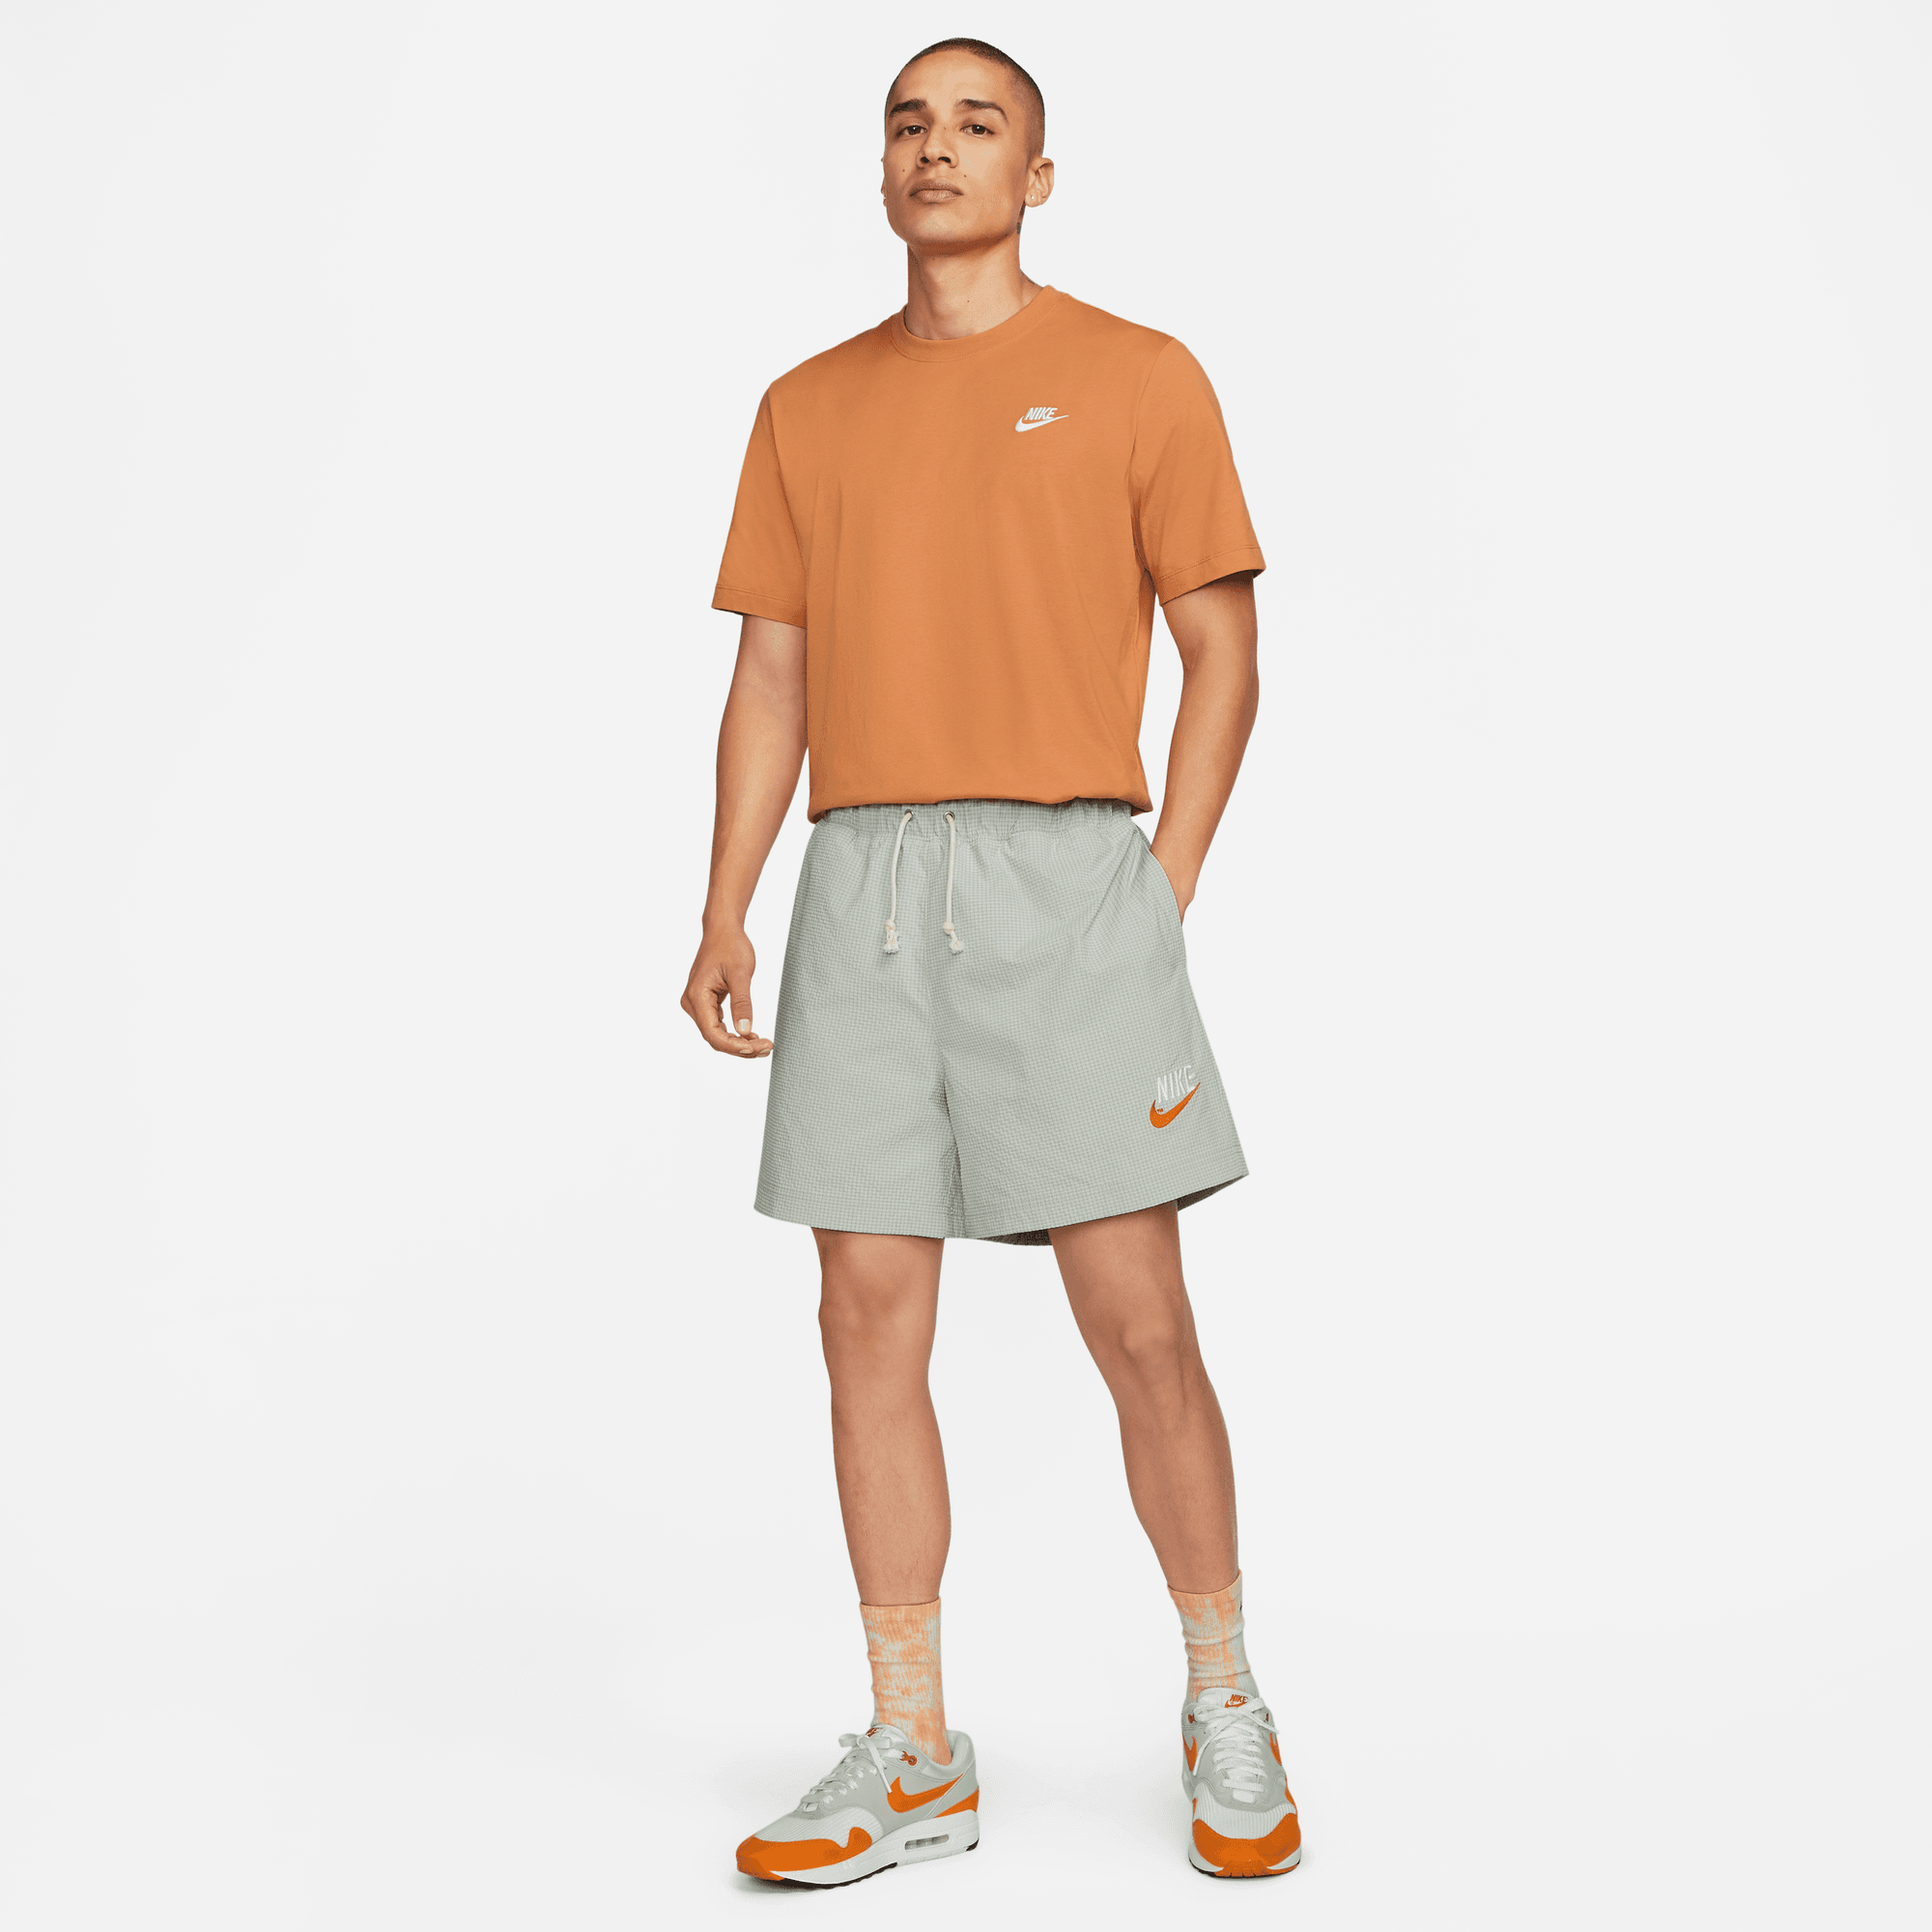 NSW Lined Woven Shorts DM5281-012 Grey – Capsule